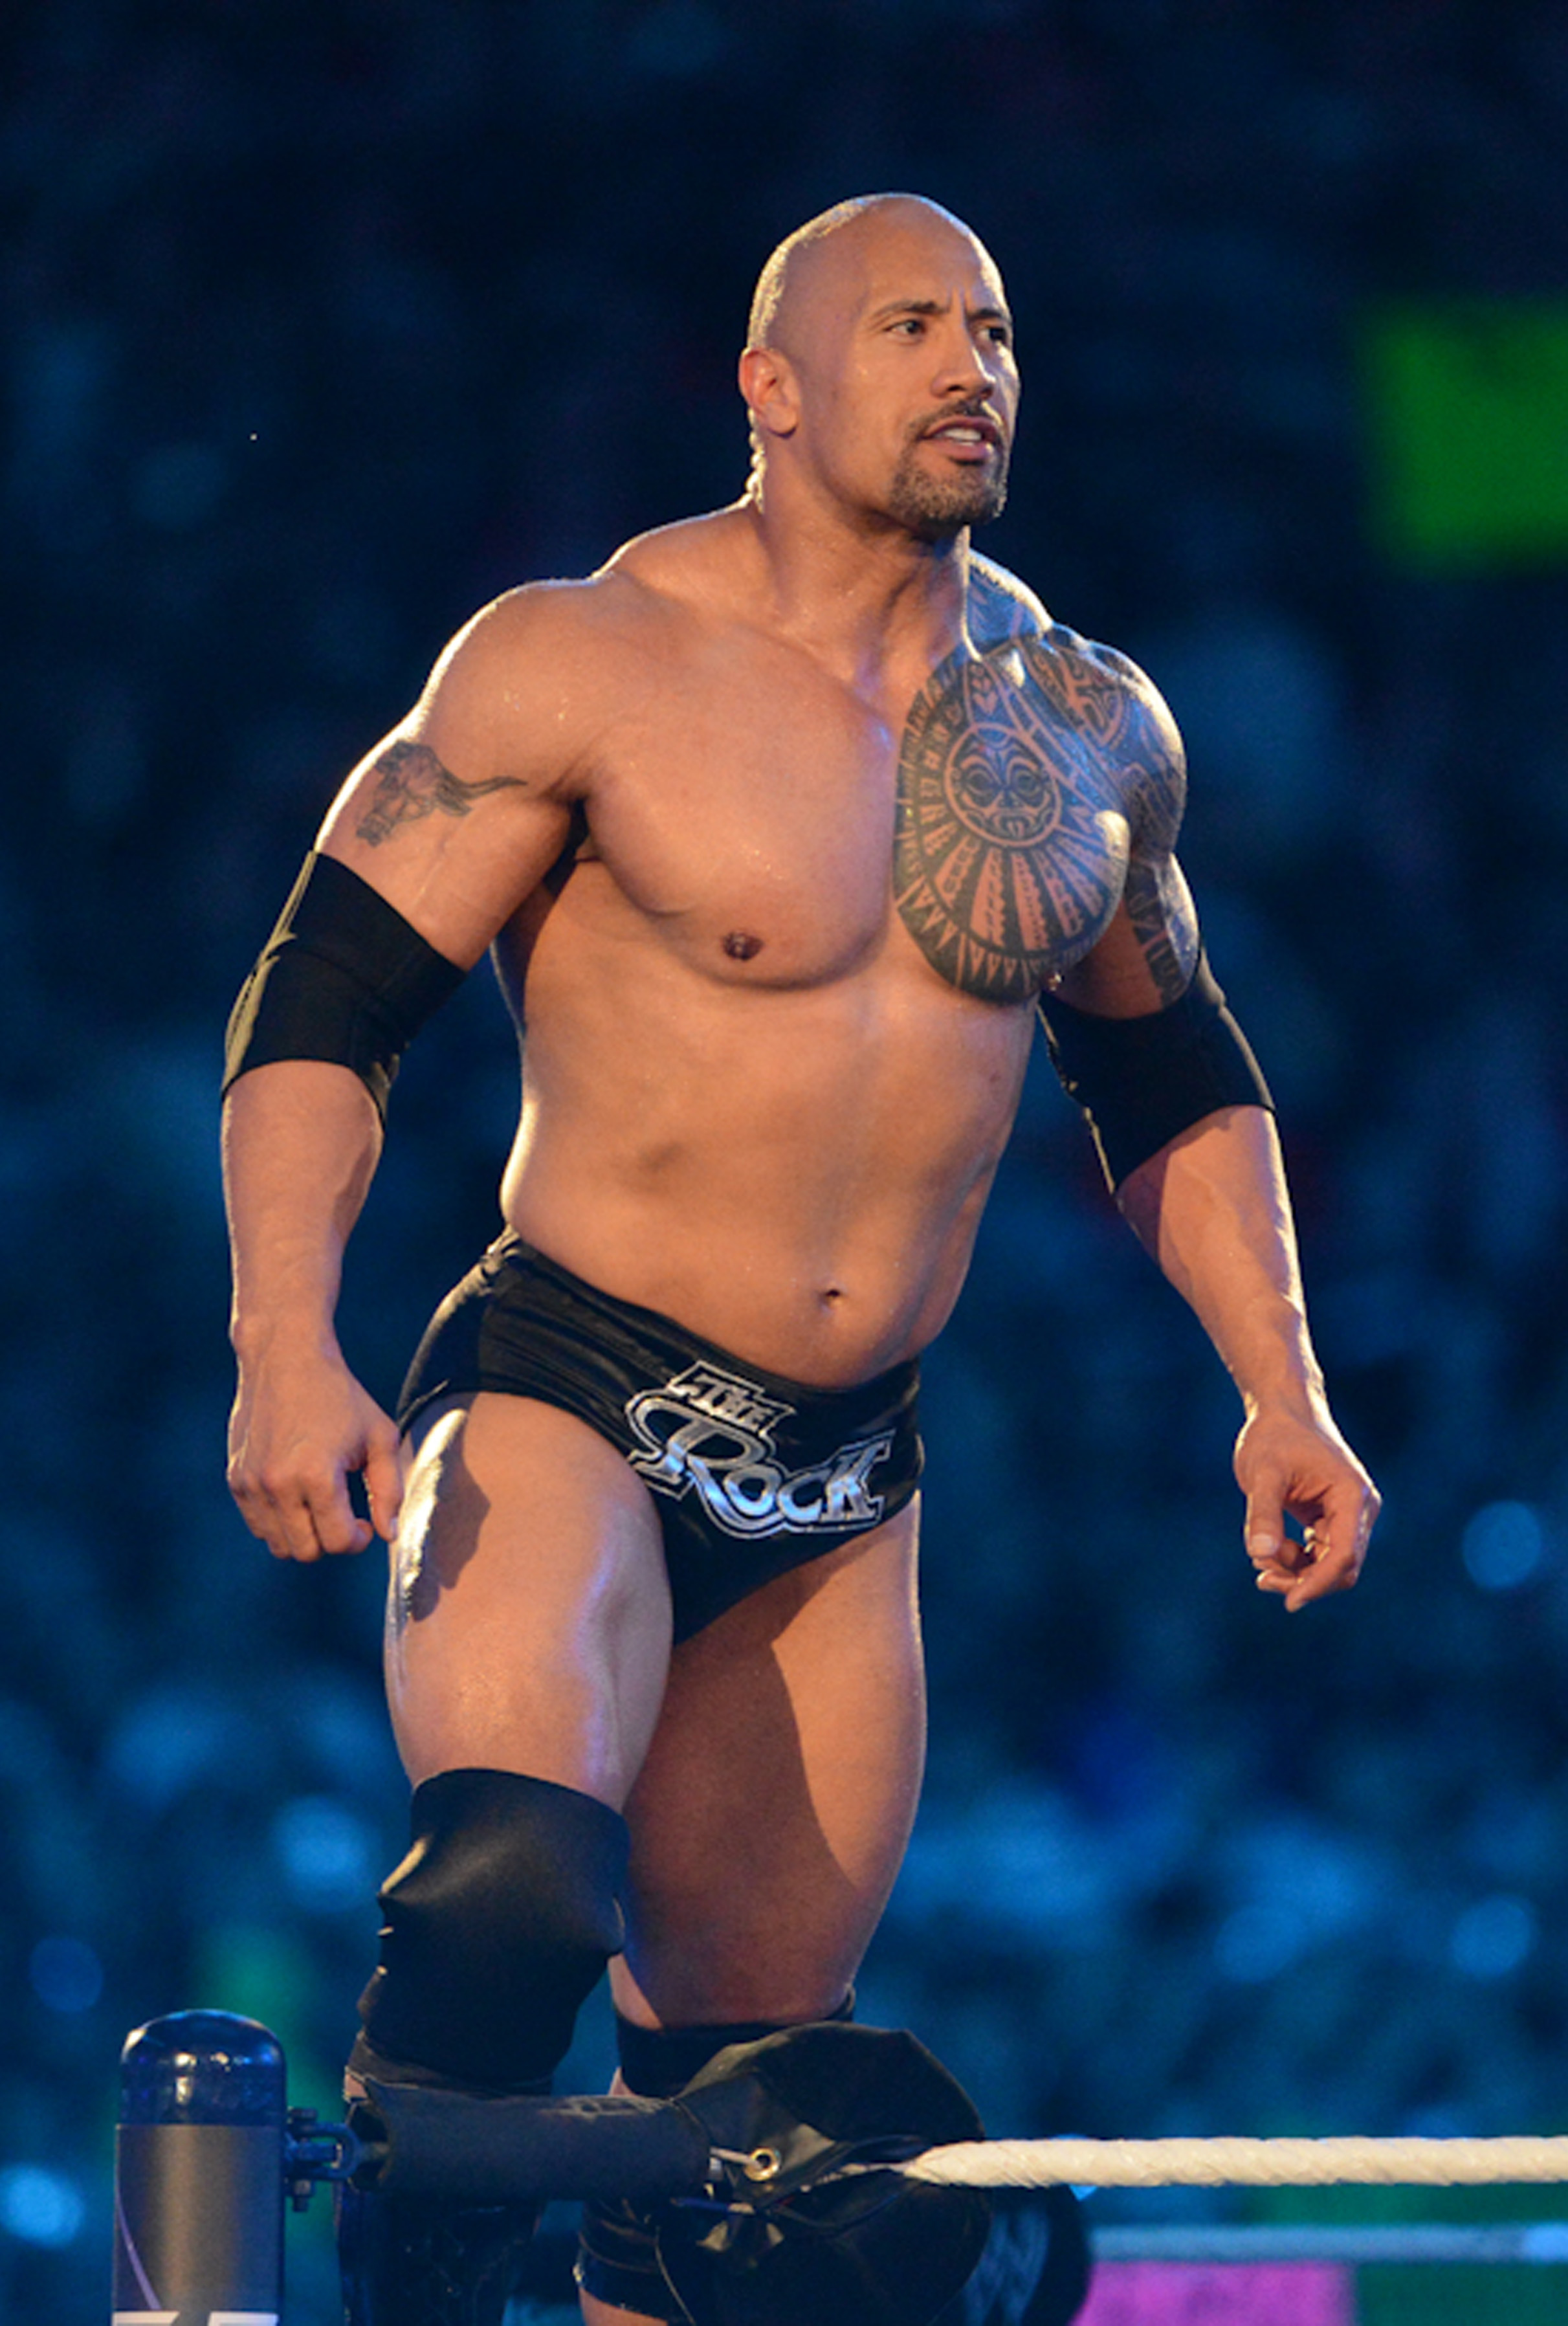 The Rock is a favourite to return and win the Men's Royal Rumble Match